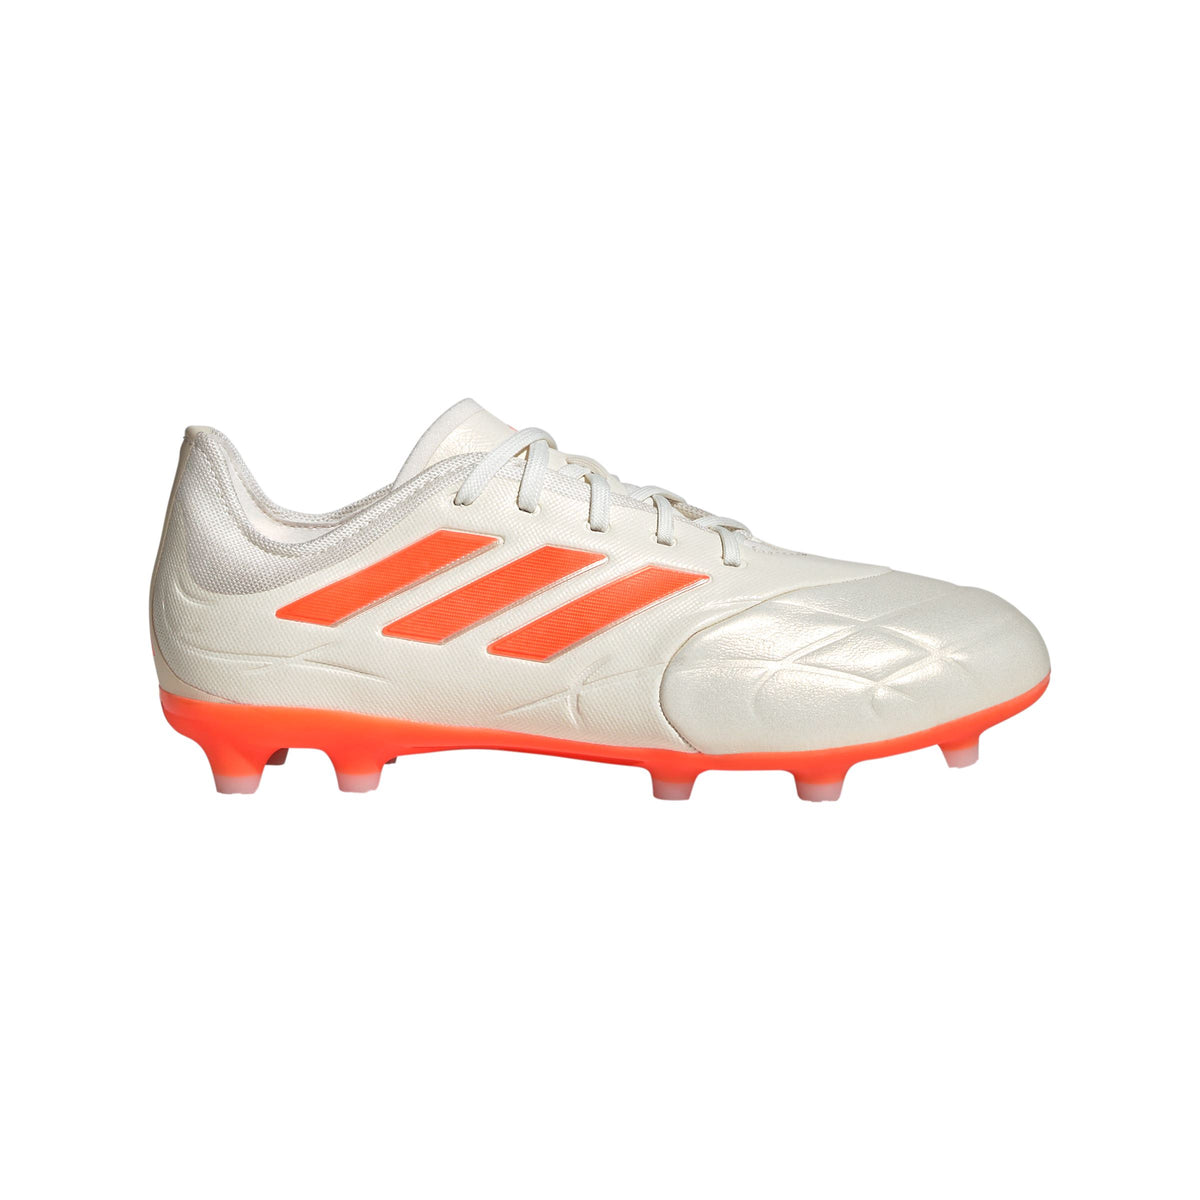 adidas Youth Copa Pure.1 FG Soccer Cleats | HQ8888 Cleats Adidas 1 Off White / Team Solar Orange / Off White 